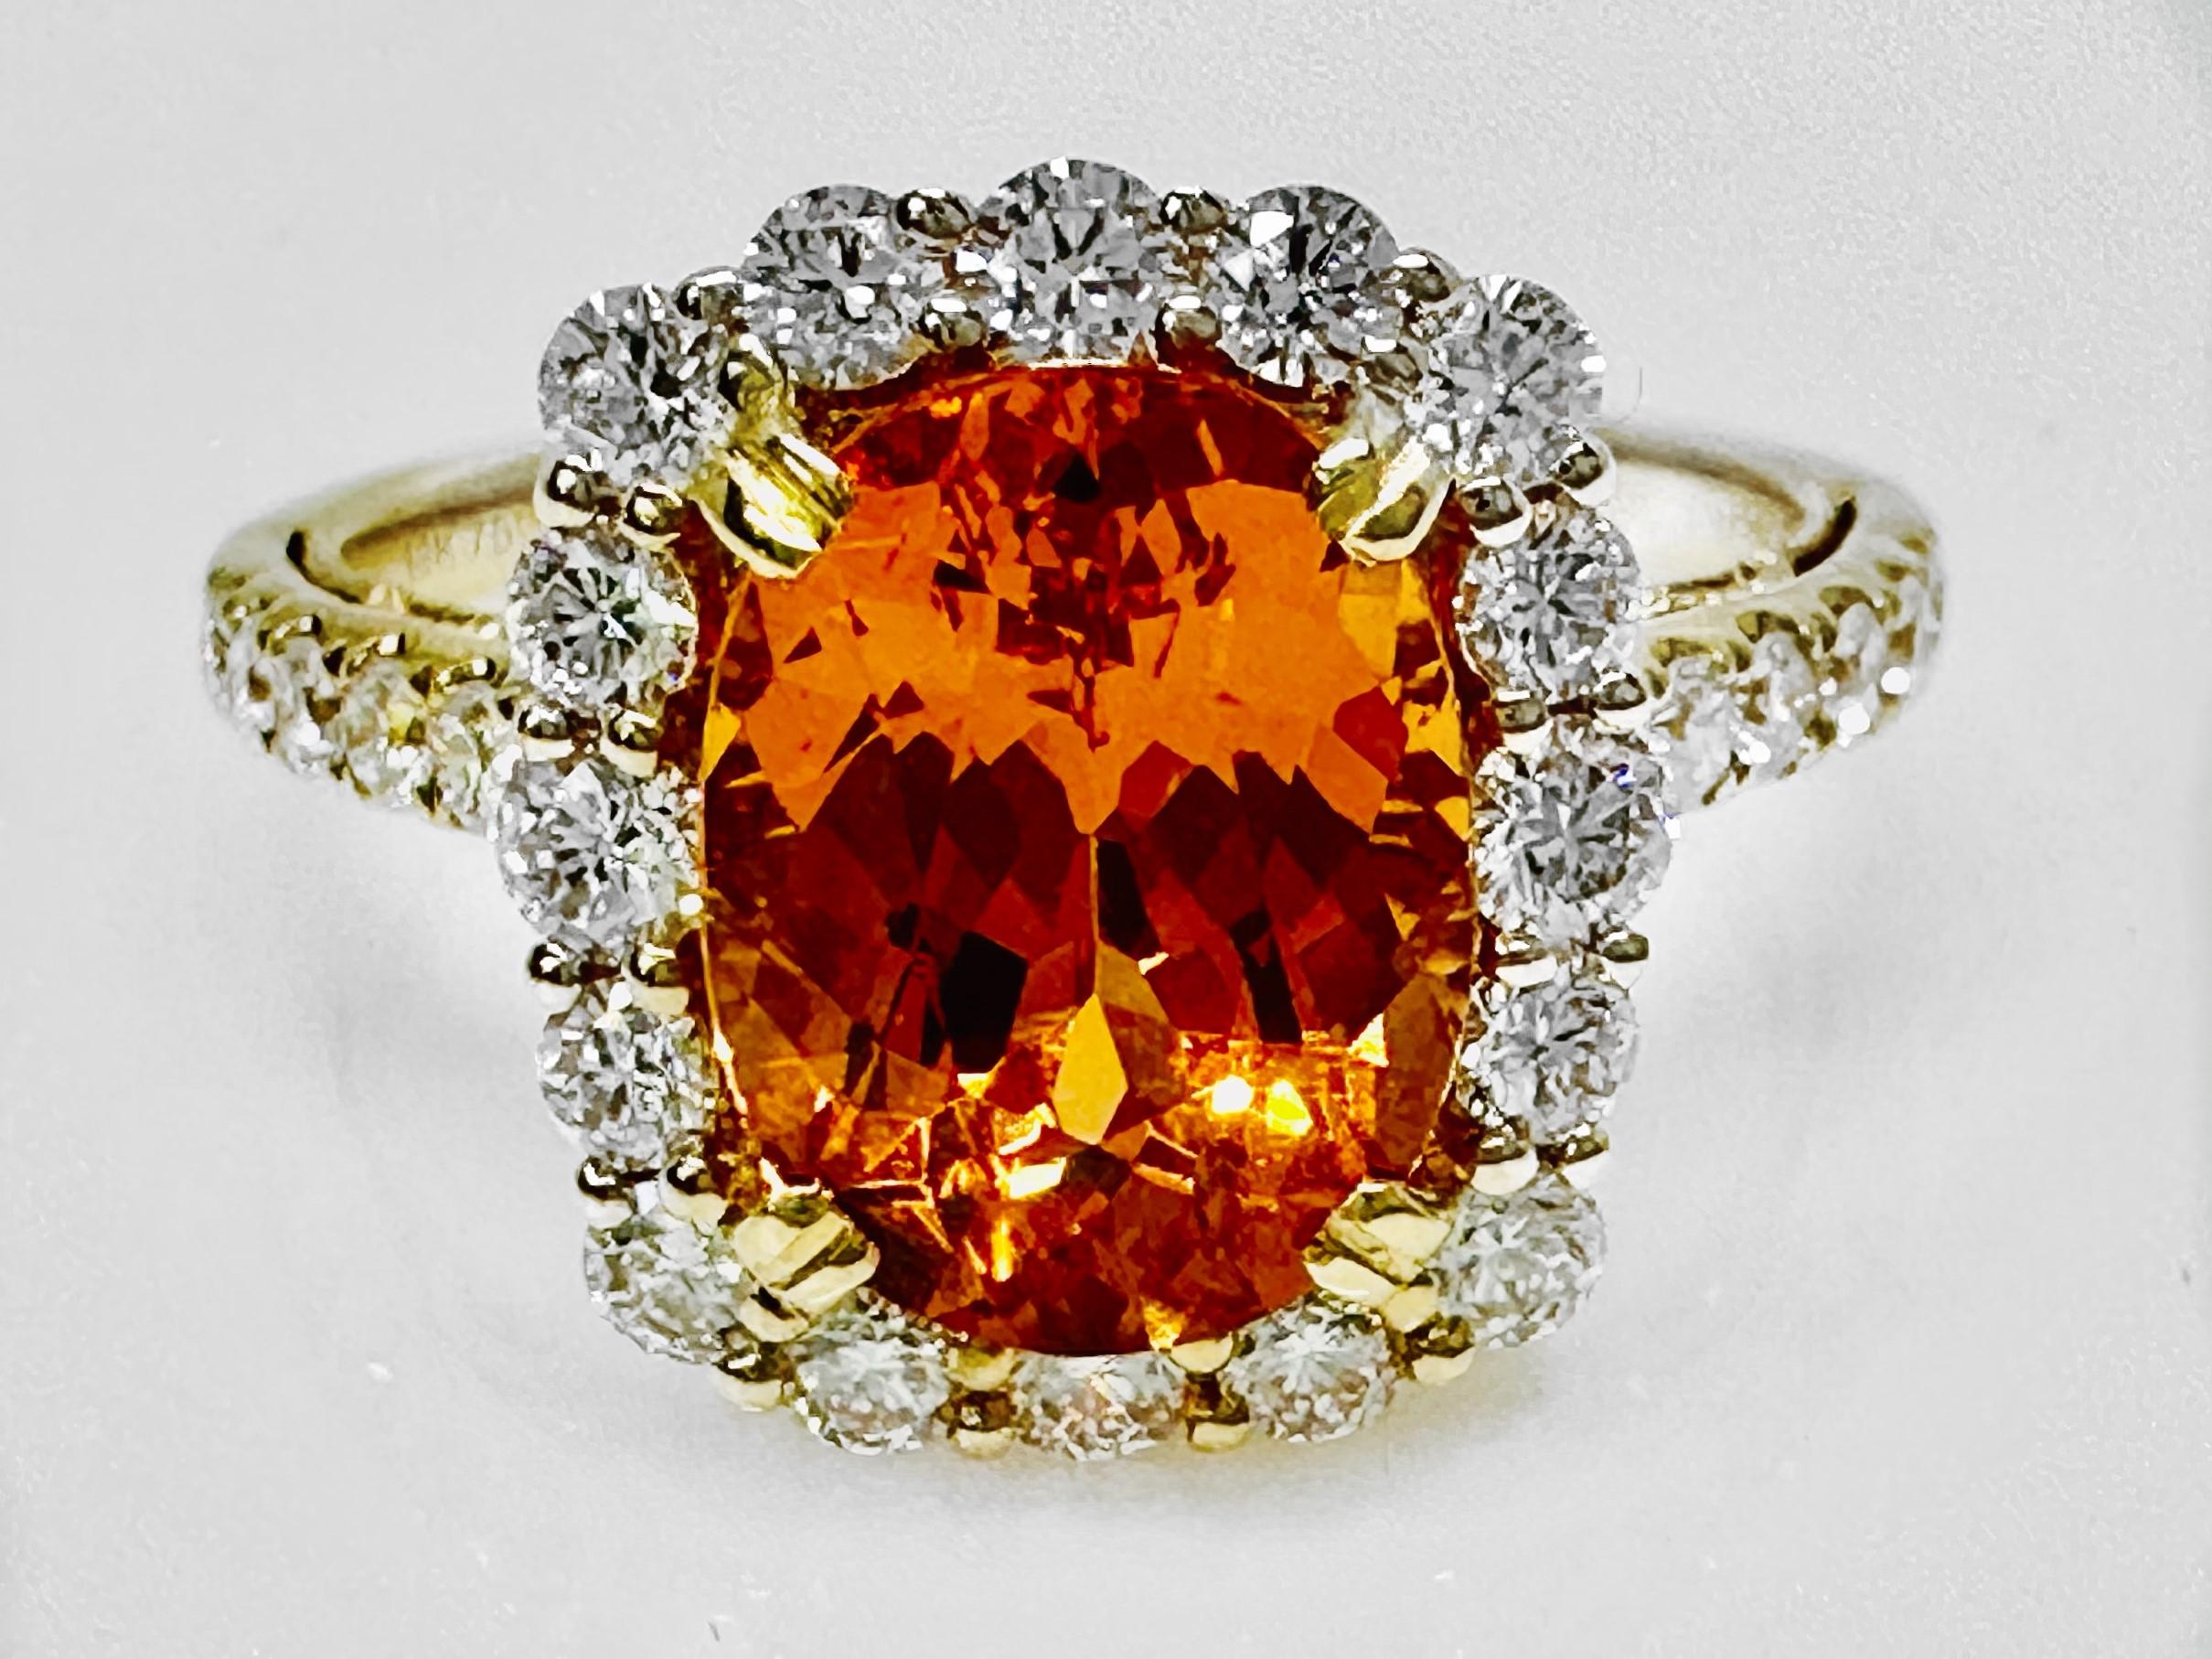 Can you say JUICY?! This gorgeous one-of-kind ring is made from 18K yellow gold, highlighting an amazing oval cut, highly saturated, 3.21 carat Spessartite surrounded by 28 round brilliant diamonds. It looks so good you could eat it! 

Spessartite